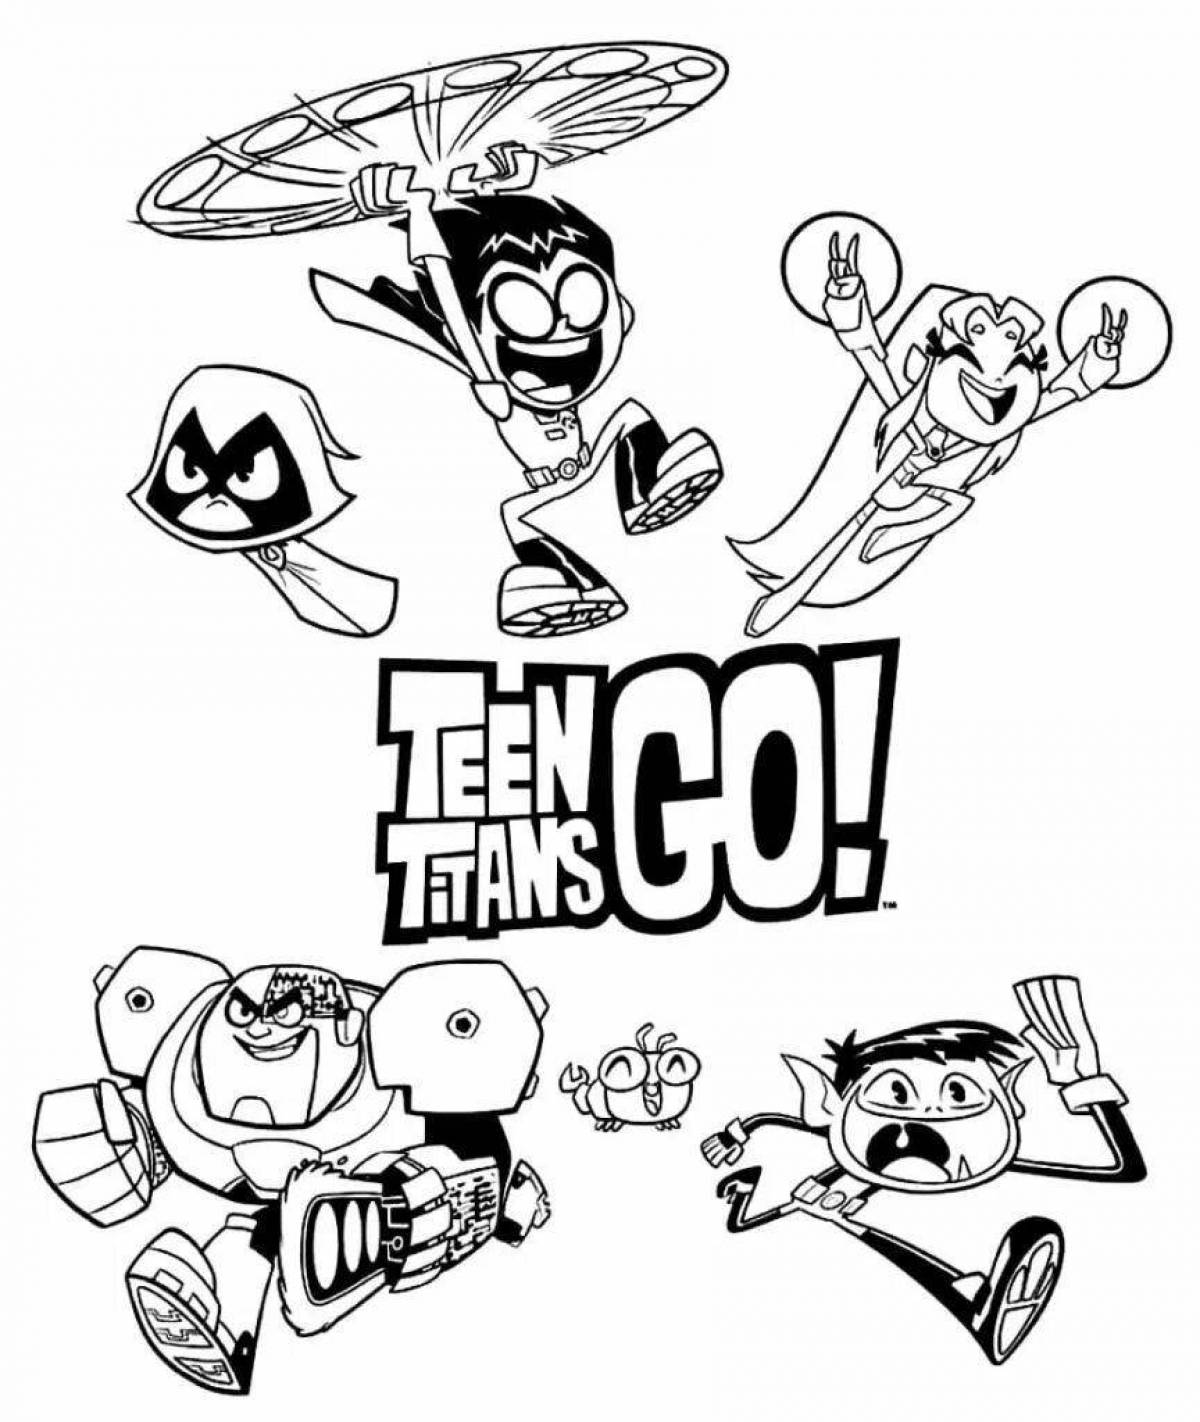 Radiant teen titans go coloring page